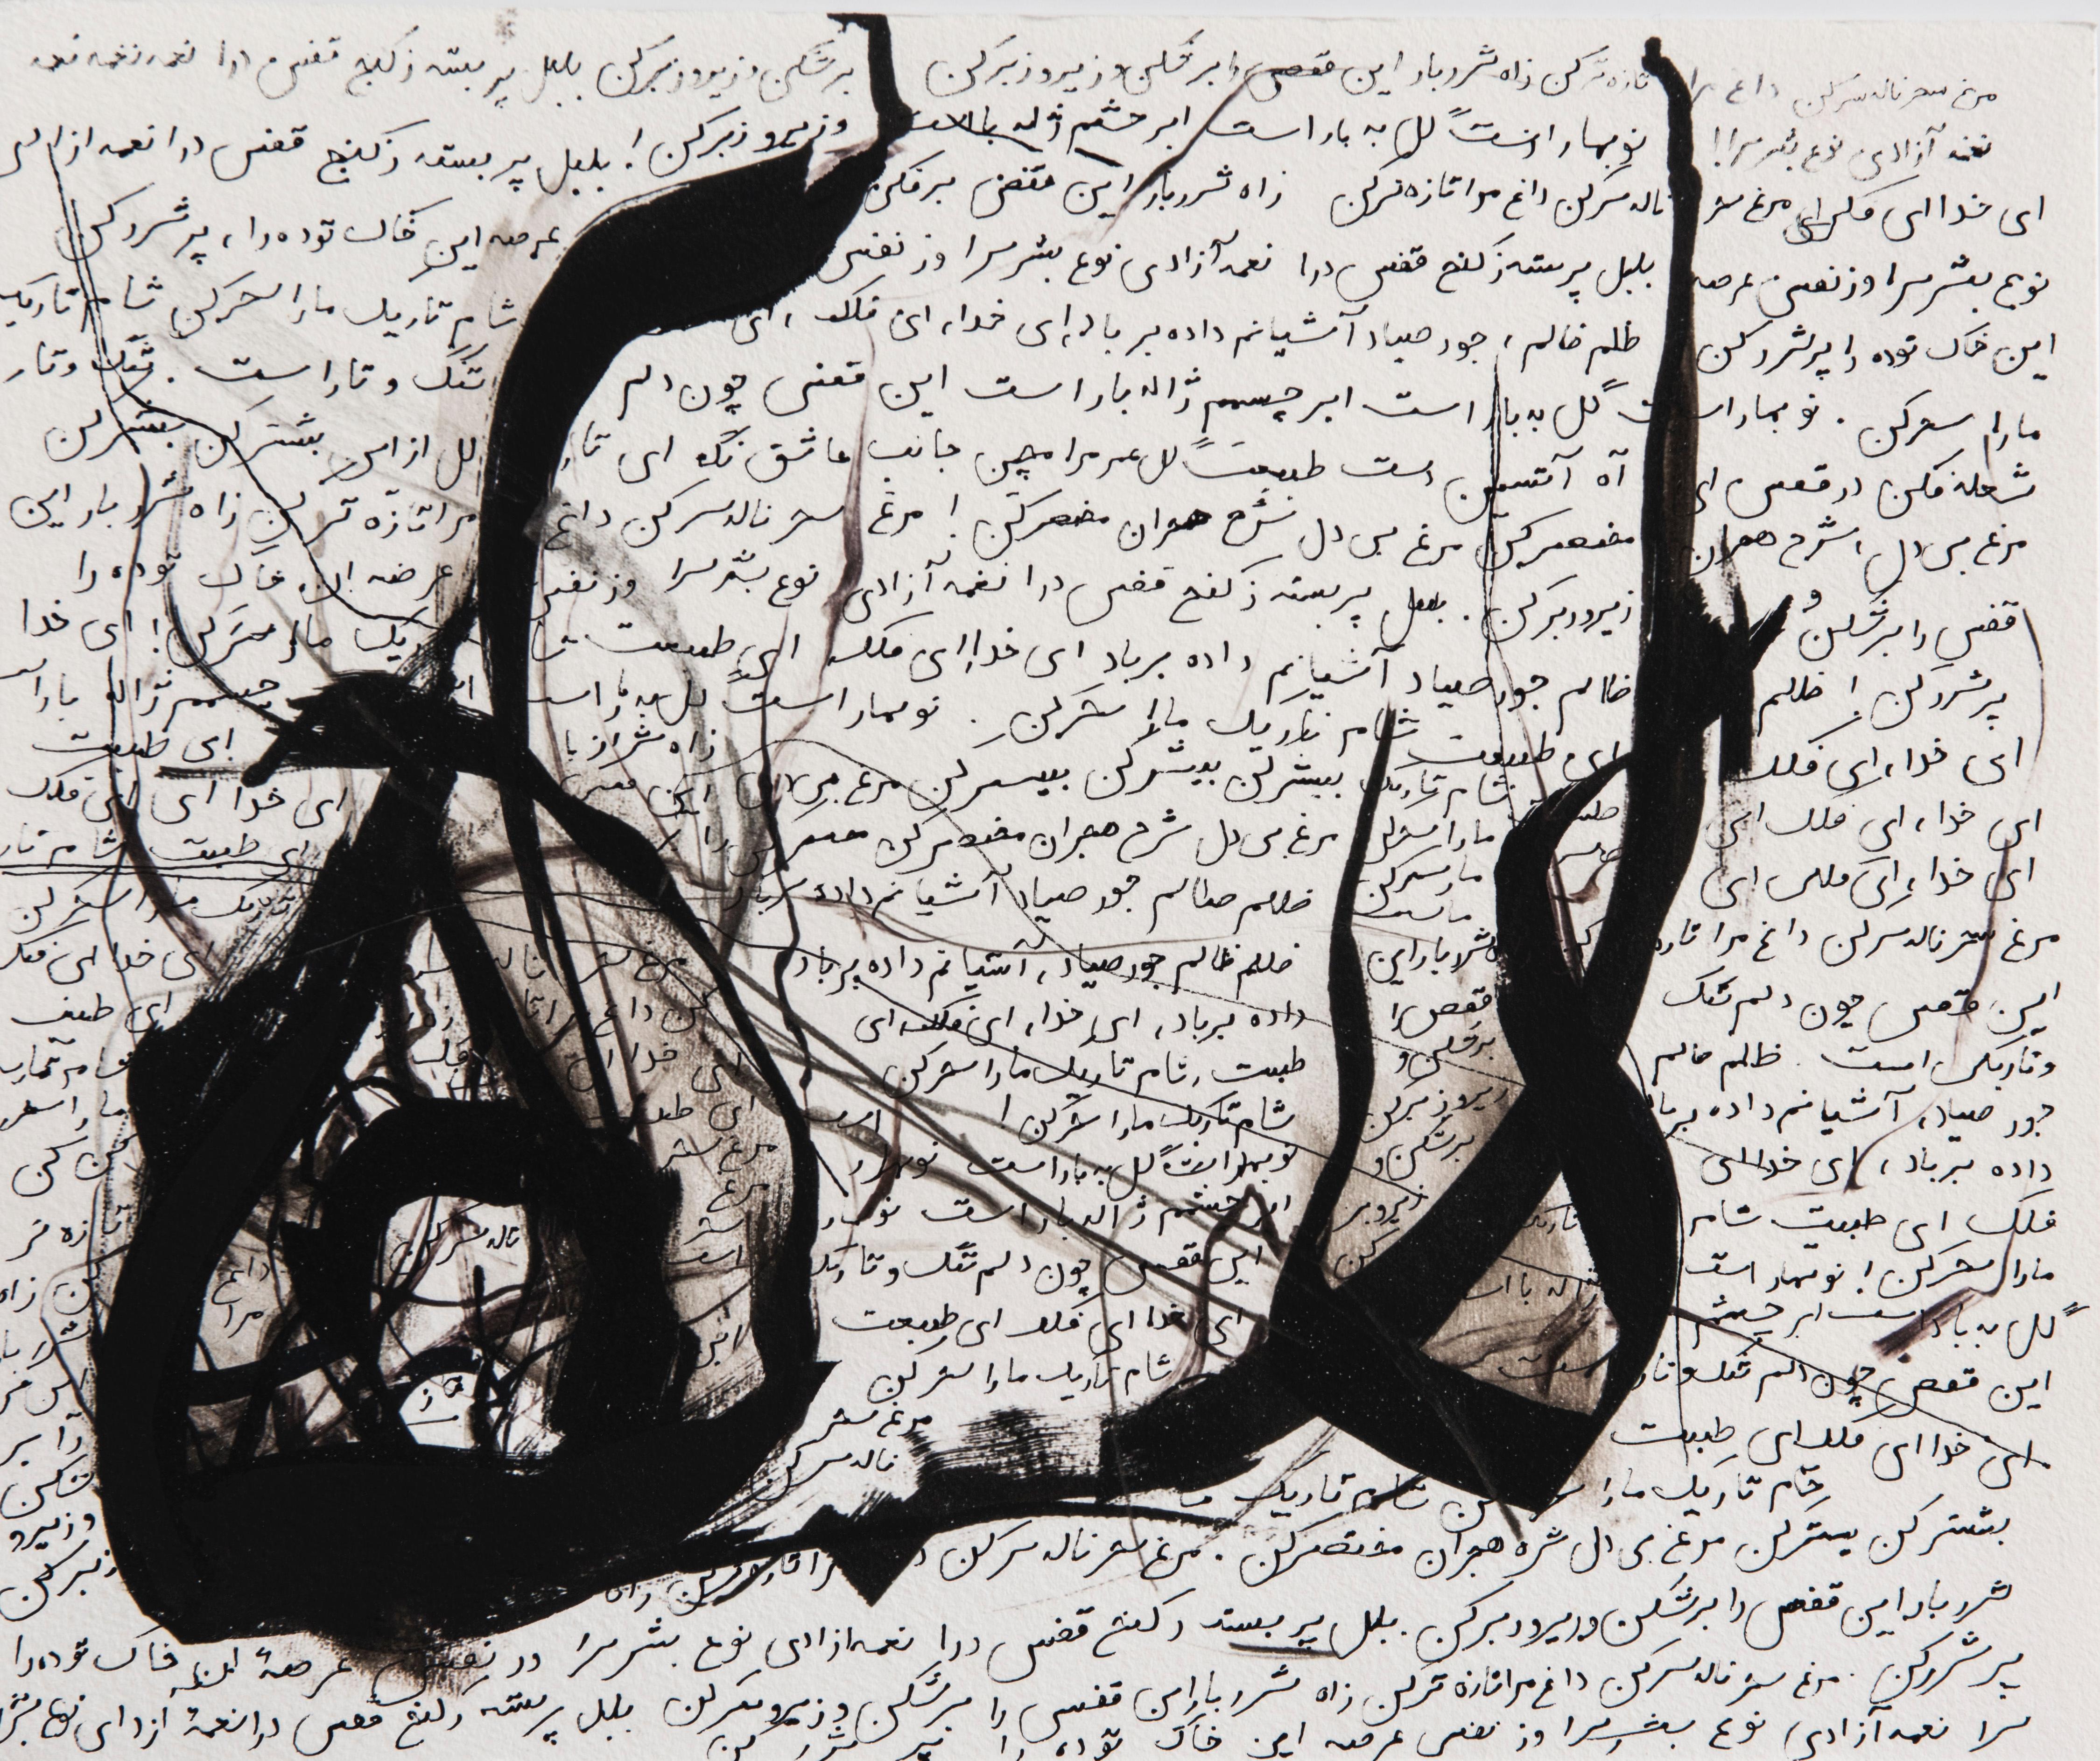 Morghe Sahar: abstract Islamic calligraphy ink drawing / painting & Persian text